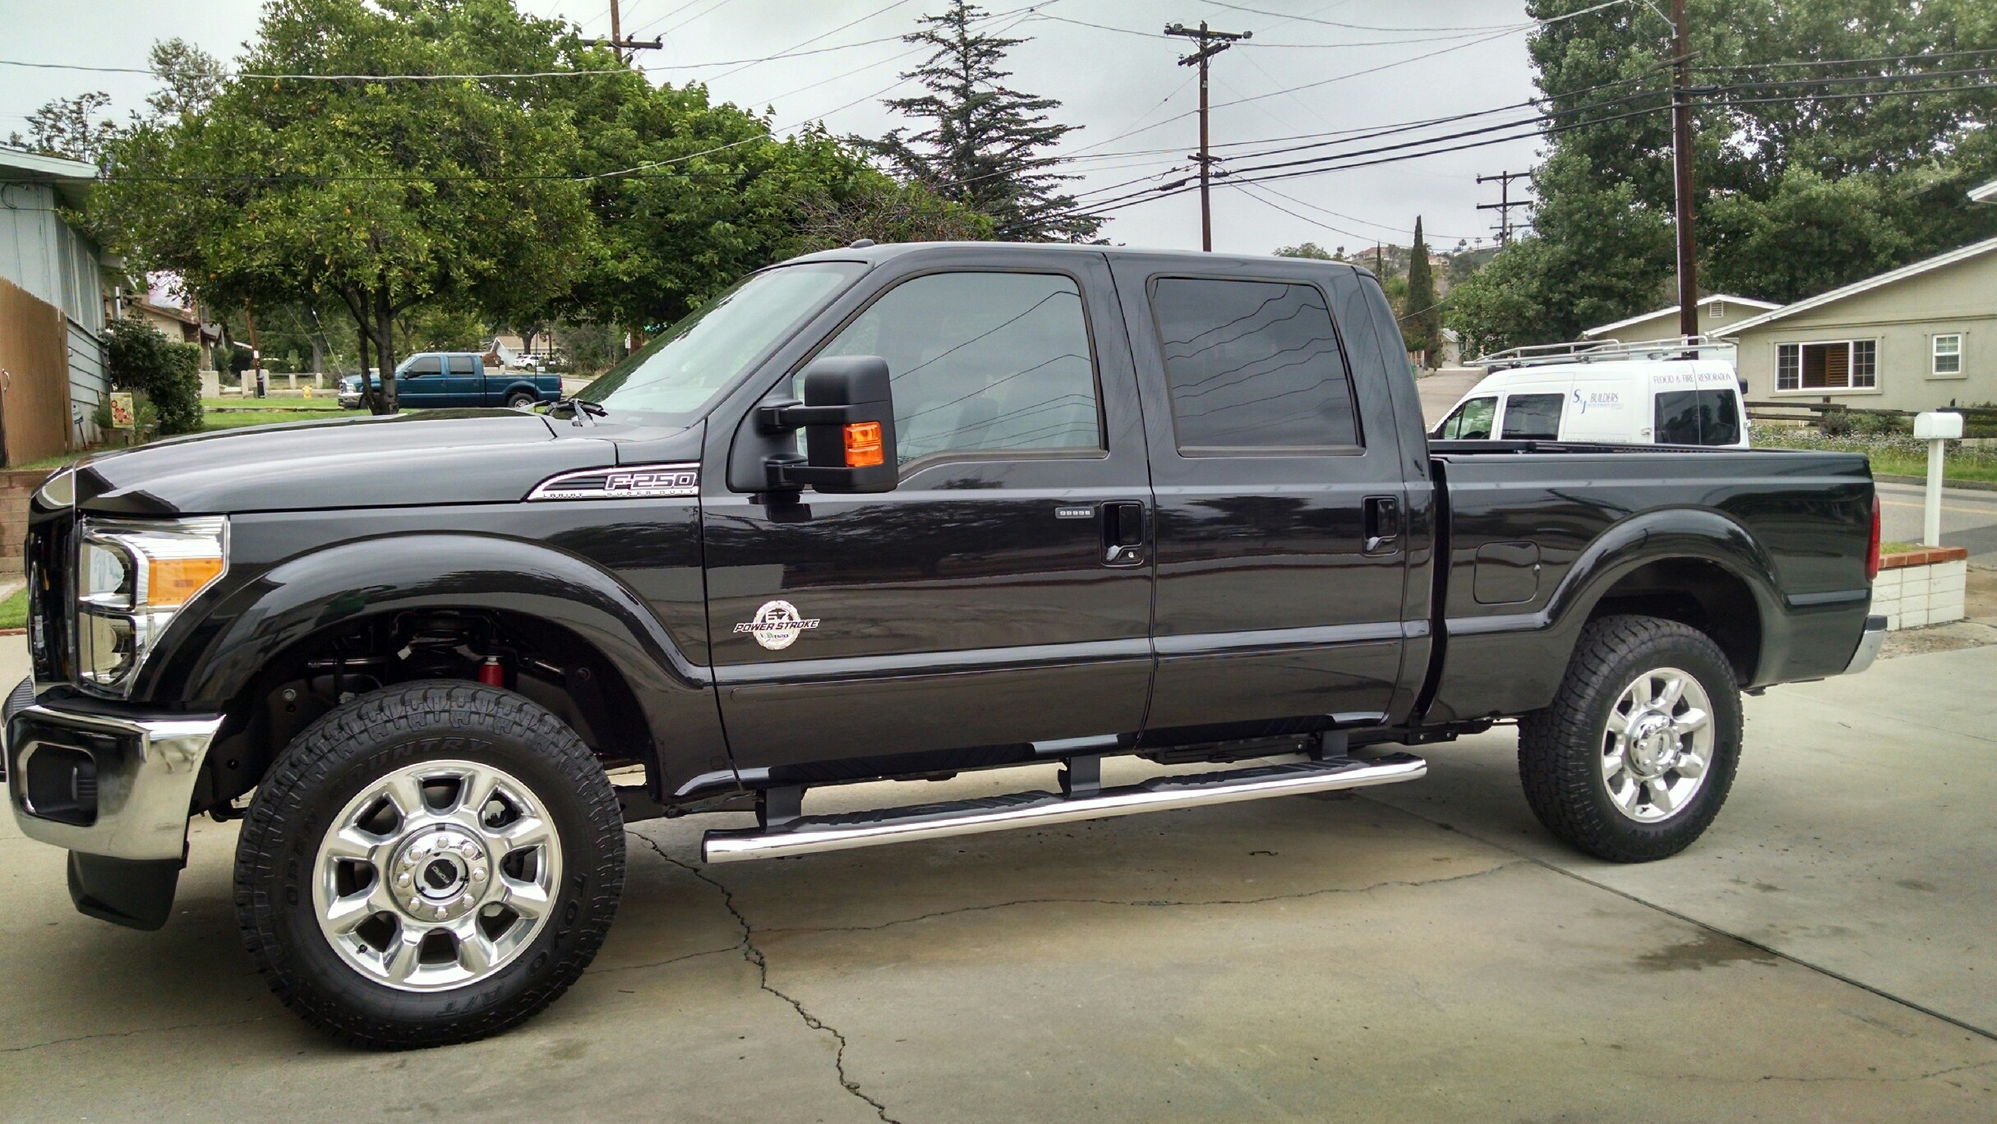 2.5 leveling kit with 35' tires - F150online Forums